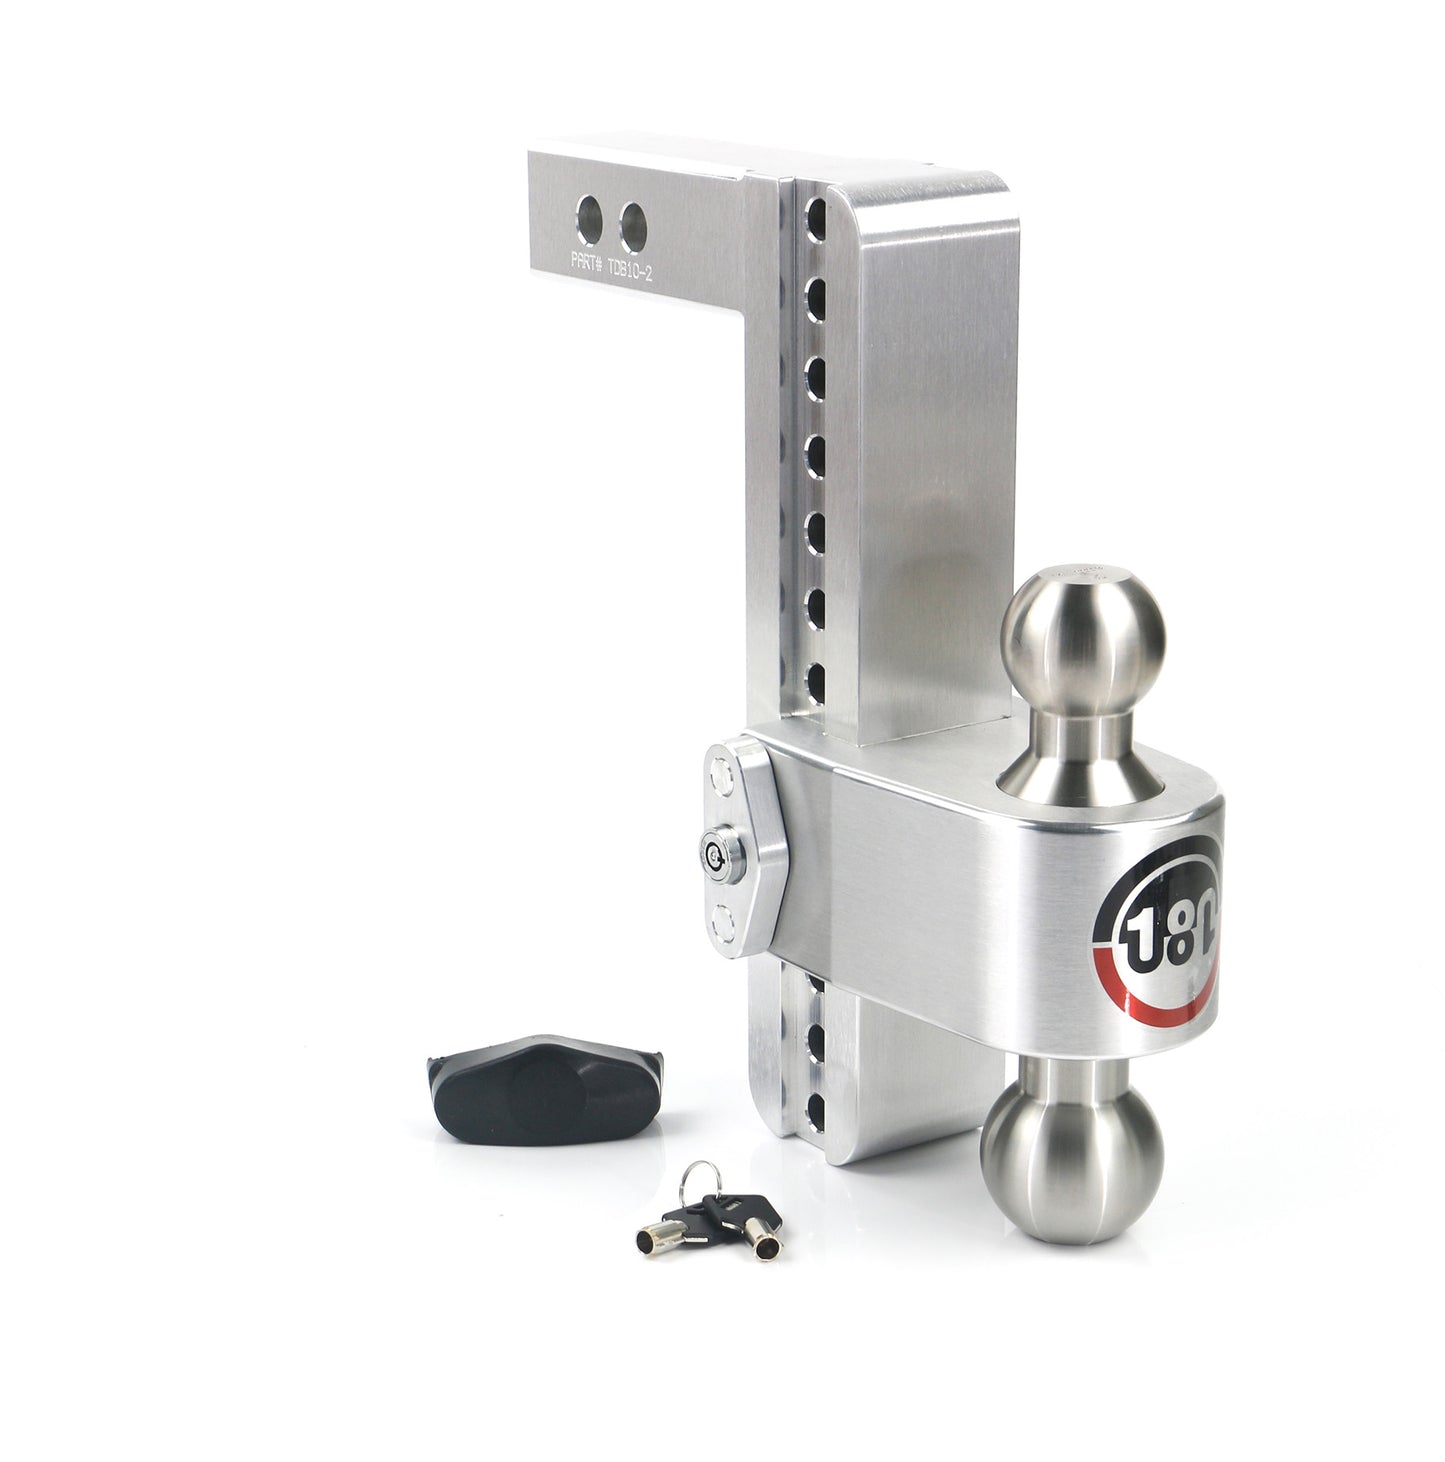 WEIGH SAFE - LTB10-2: 10INDROPT/OBALL 2INSHANK